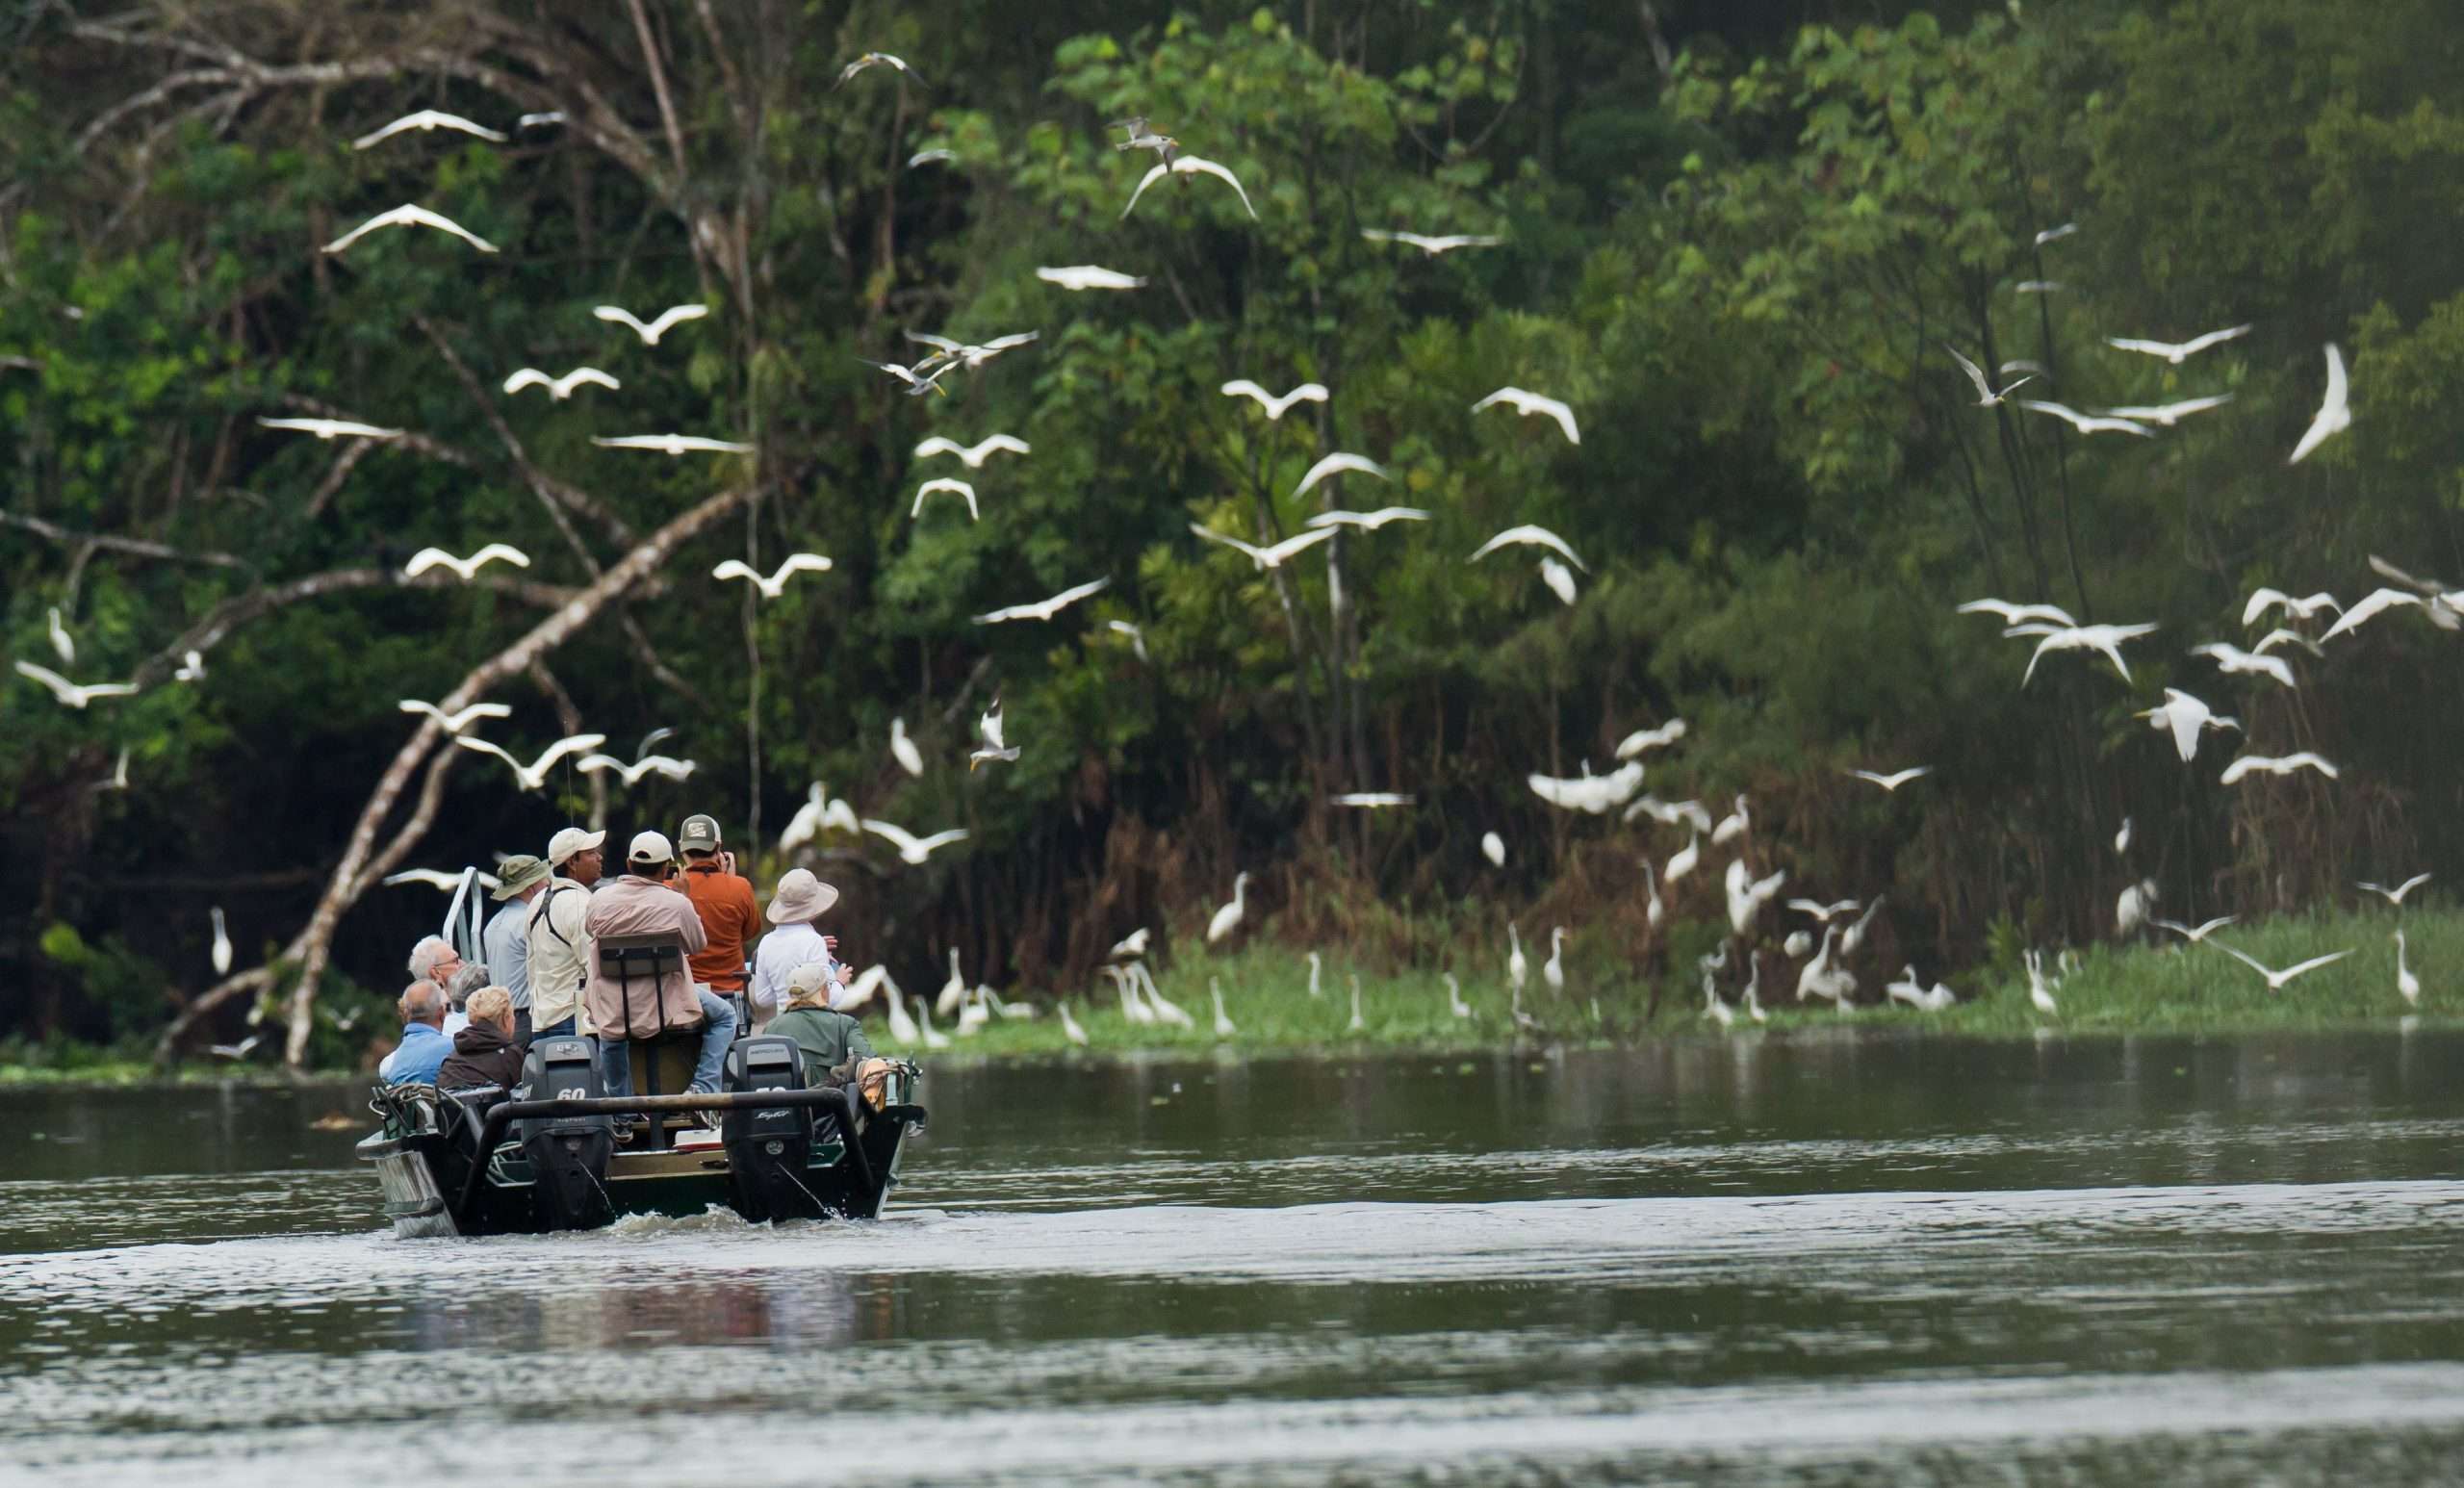 Travelers boat down the amazon river in South America birdwatching and viewing wildlife eco tourism nature travel rain forest conservation